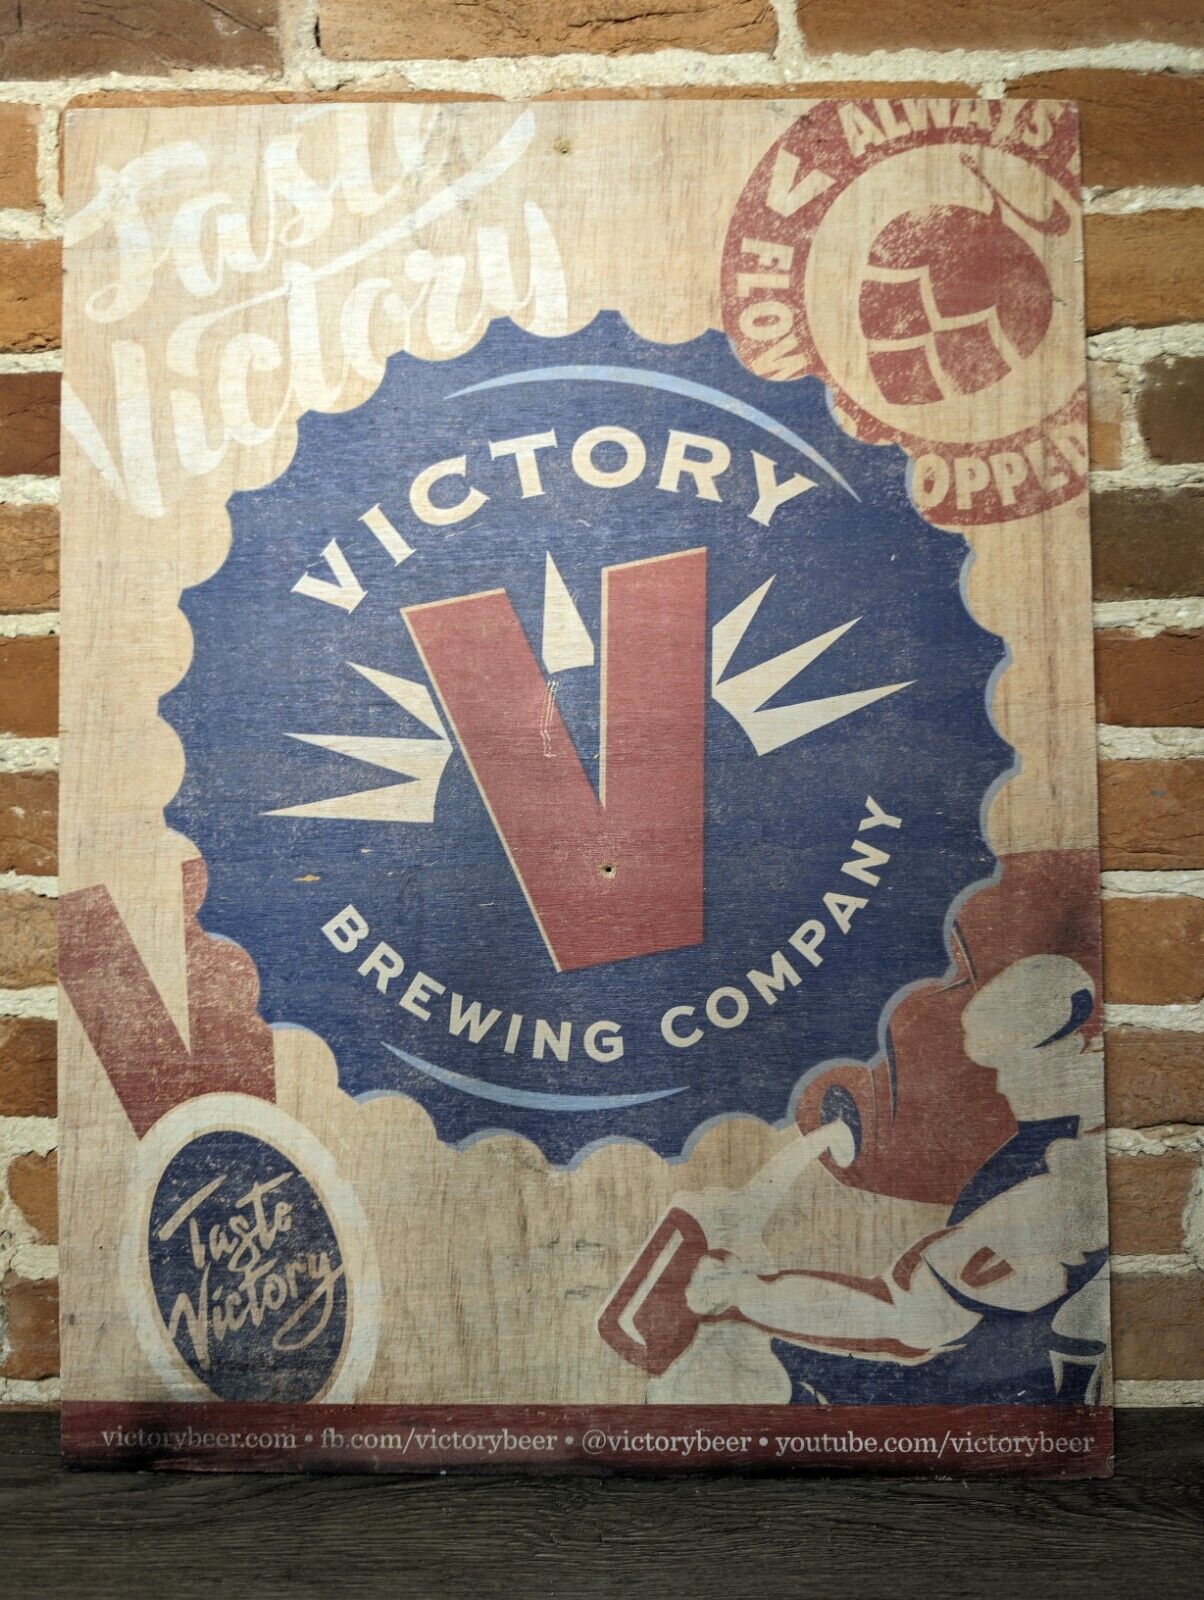 RARE Victory Brewing Company Beer Advertising Wooden Display Sign 18